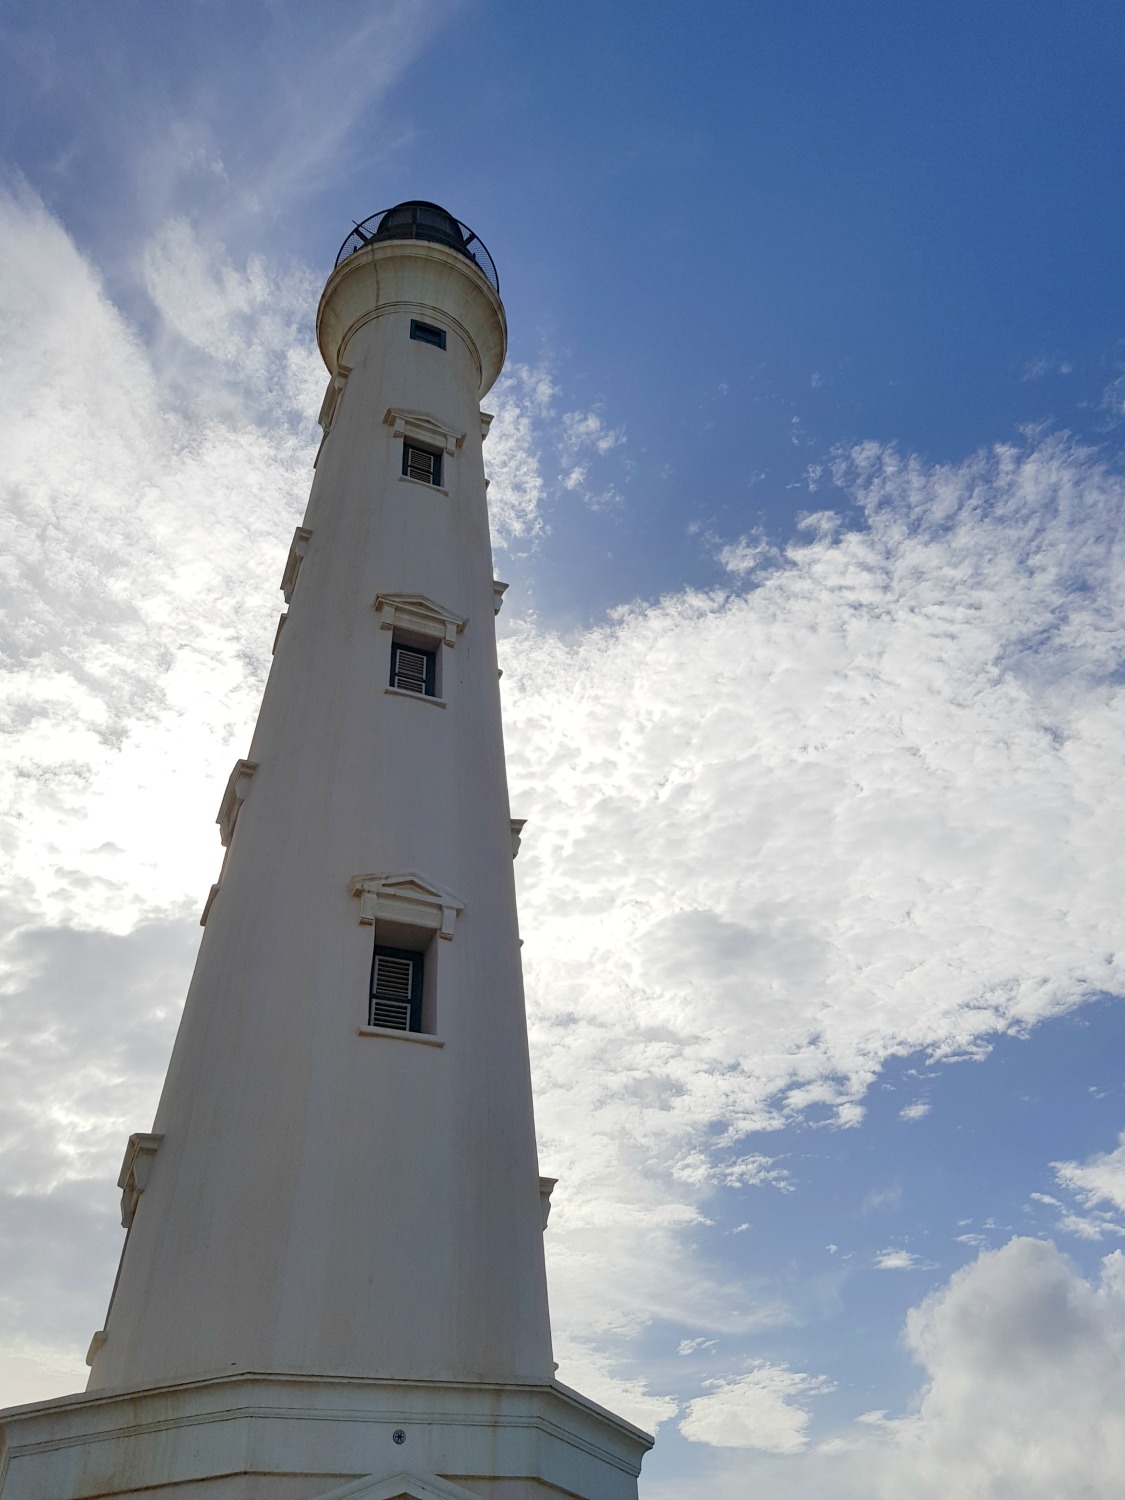 The California lighthouse on Aruba's northernmost tip, against a blue sky - if you visit Aruba with kids, older ones will enjoy the views from the top